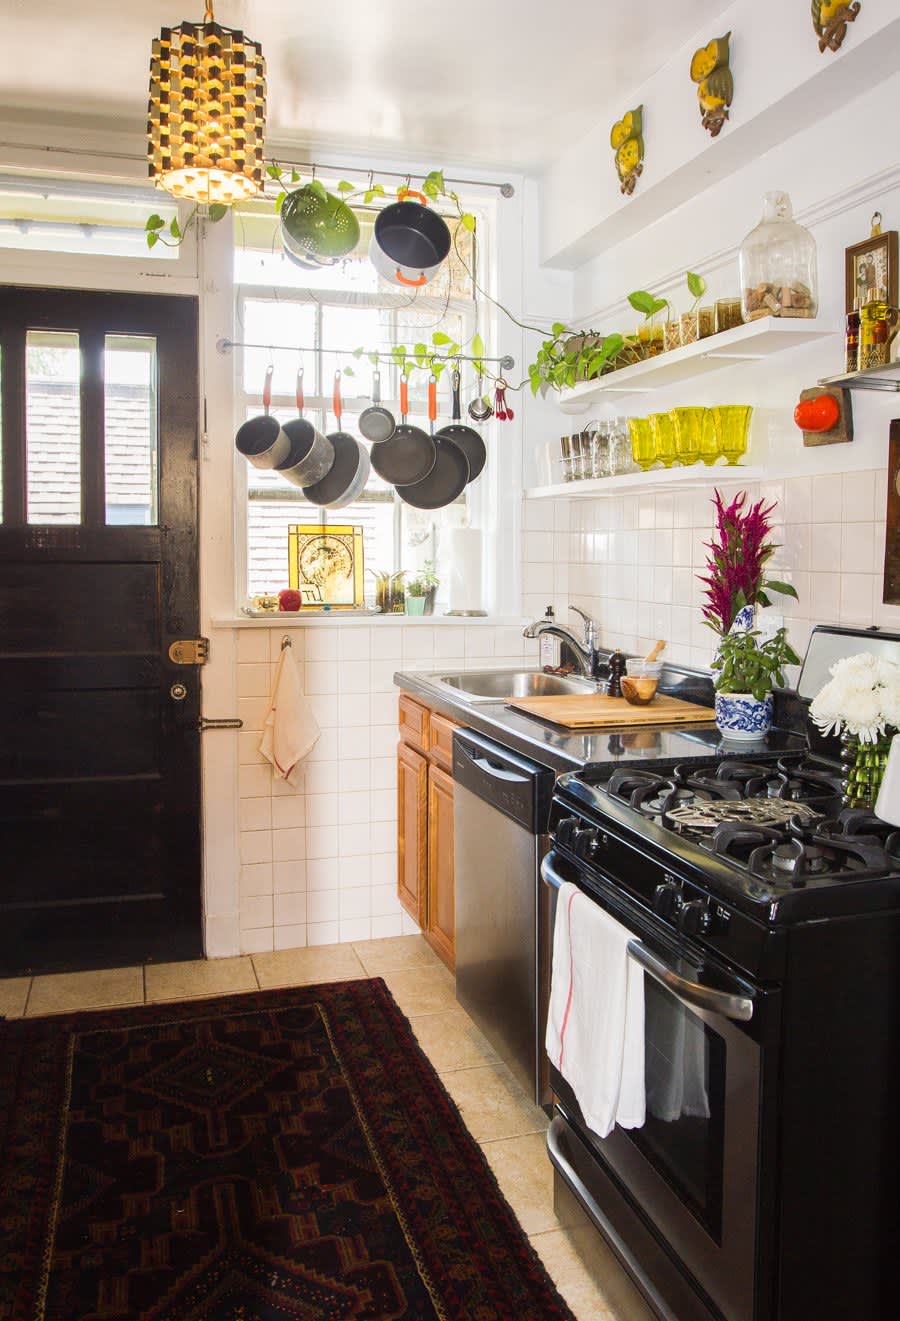 12 small kitchen storage ideas to cook up a style storm in a tiny space